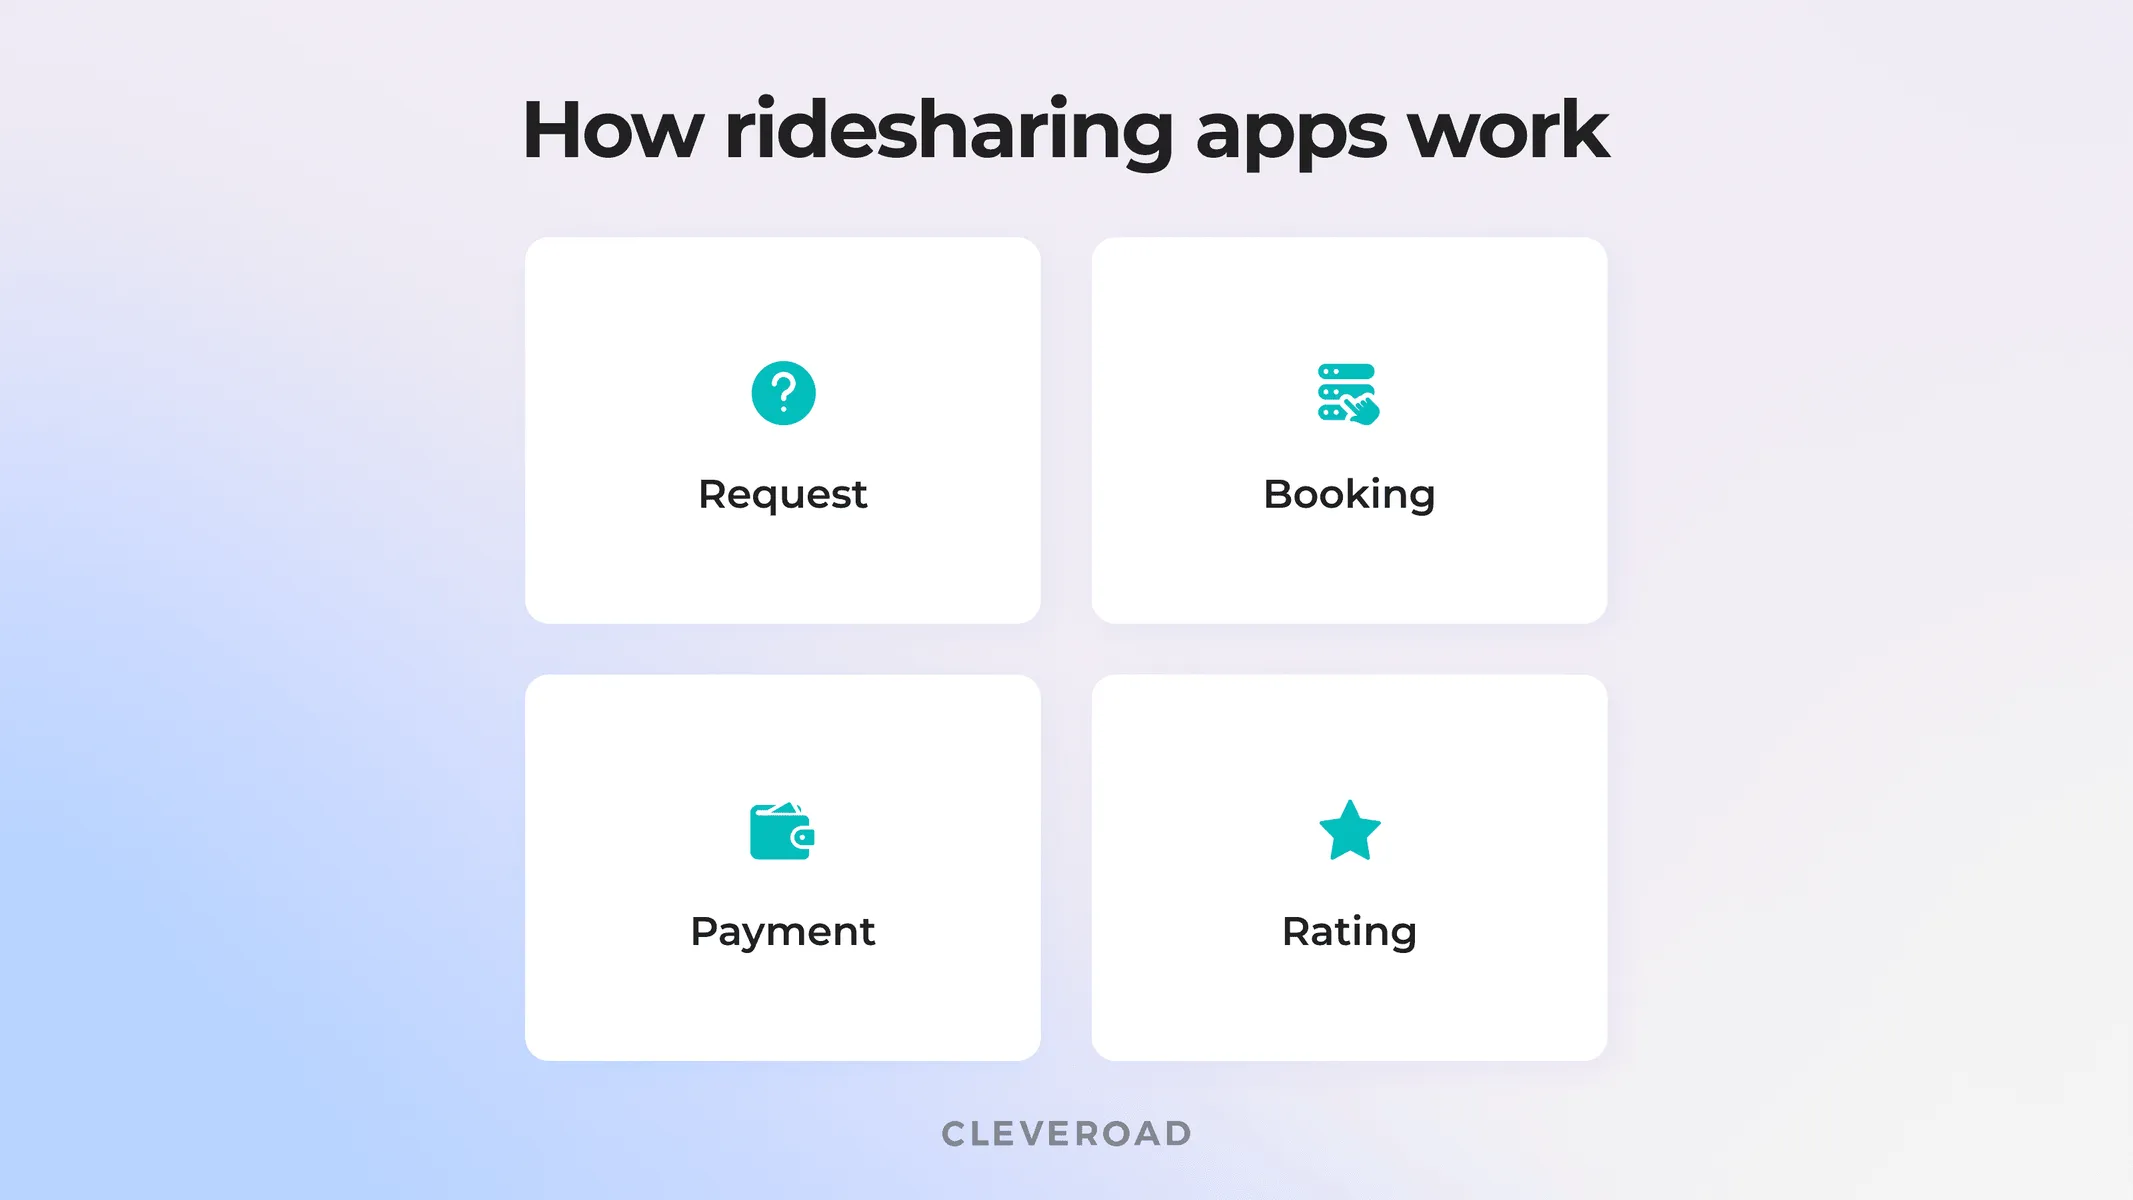 How do ridesharing apps work?